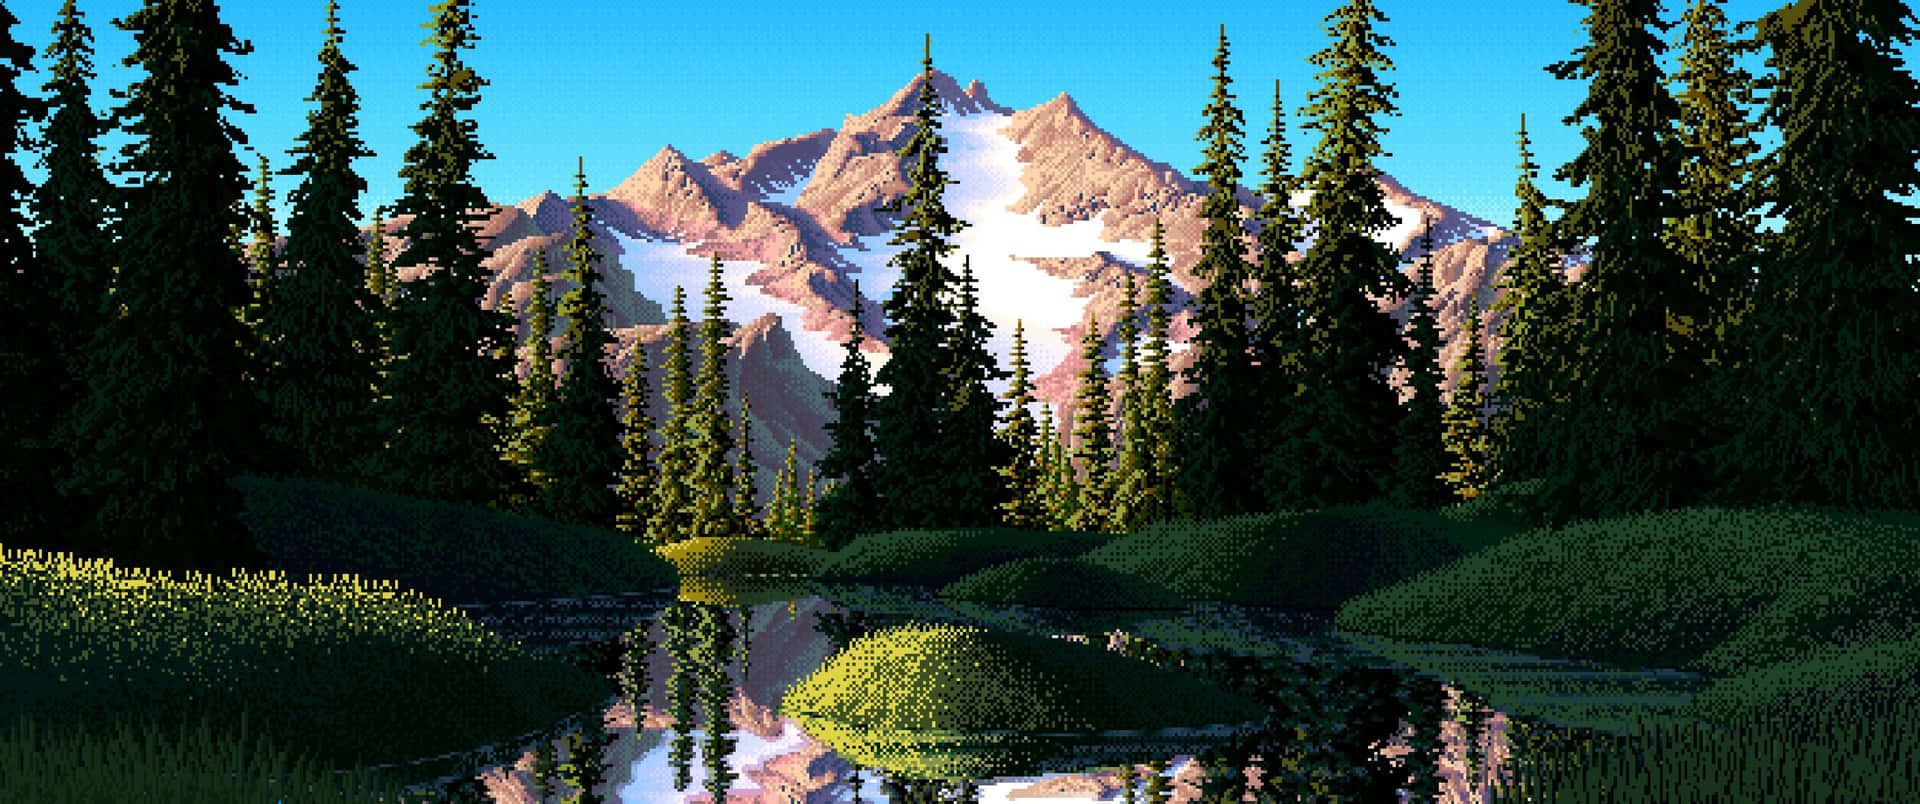 a mountain in the background